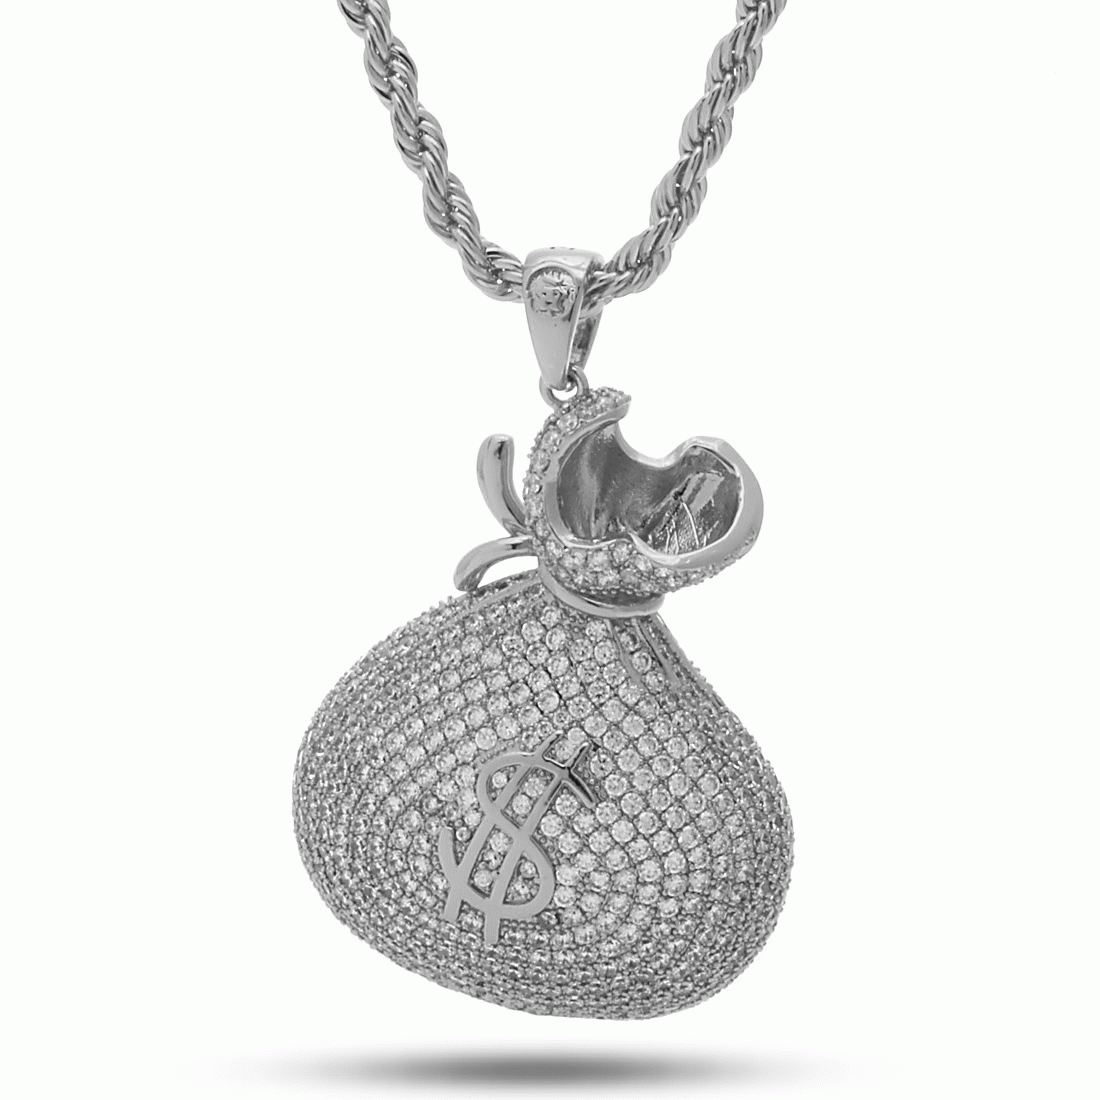 The White Gold Money Bag Necklace - Designed by Snoop Dogg x King Ice